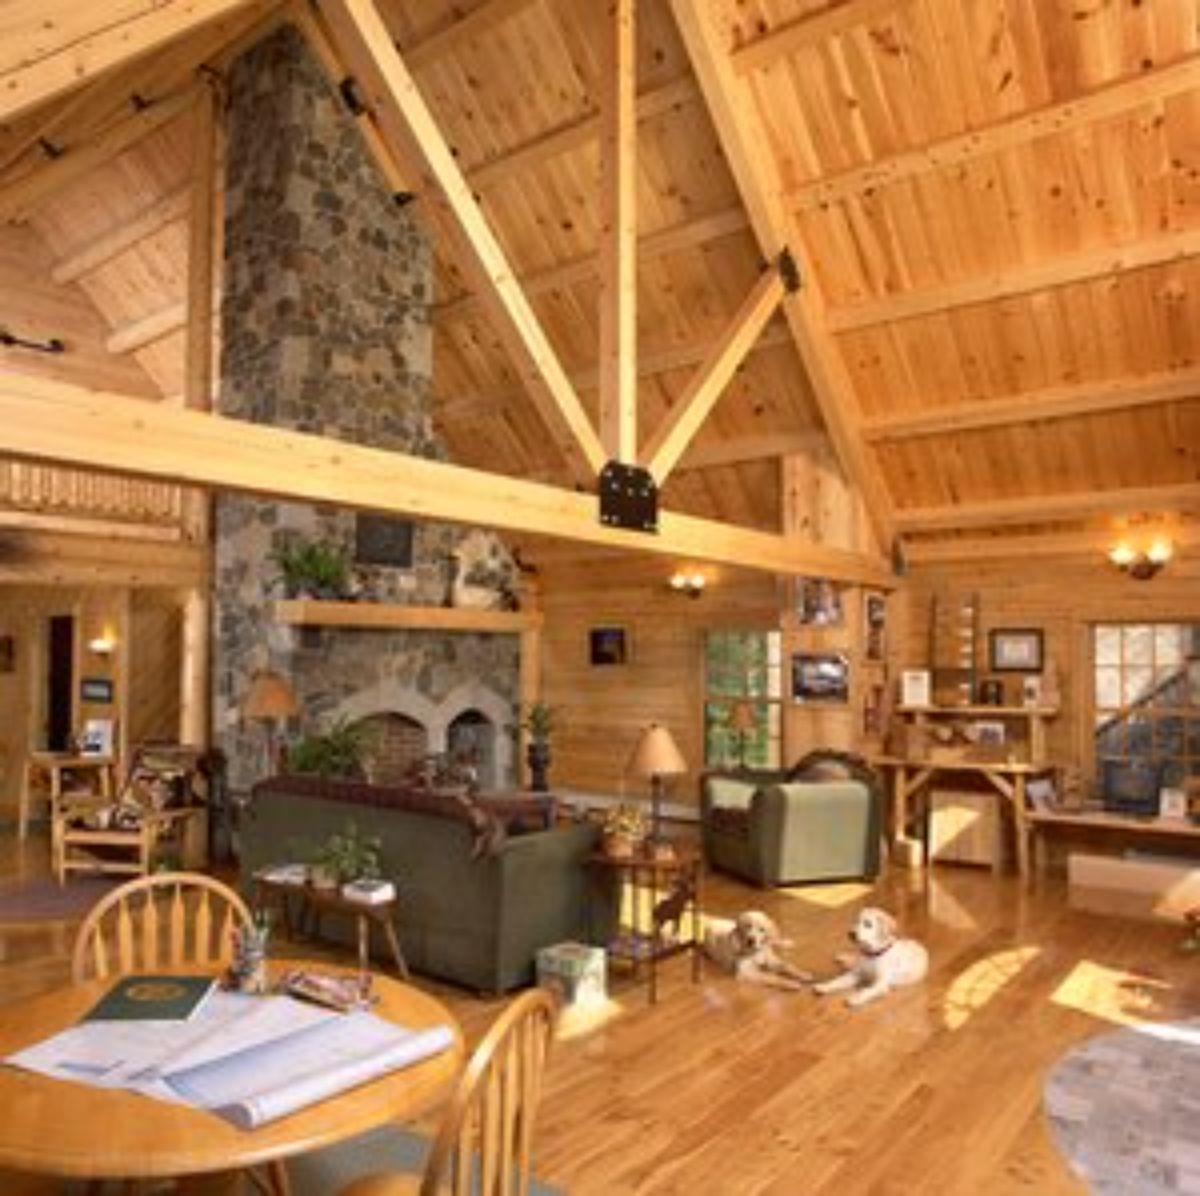 stone fireplace against wall with dining table in foreground inside cabin